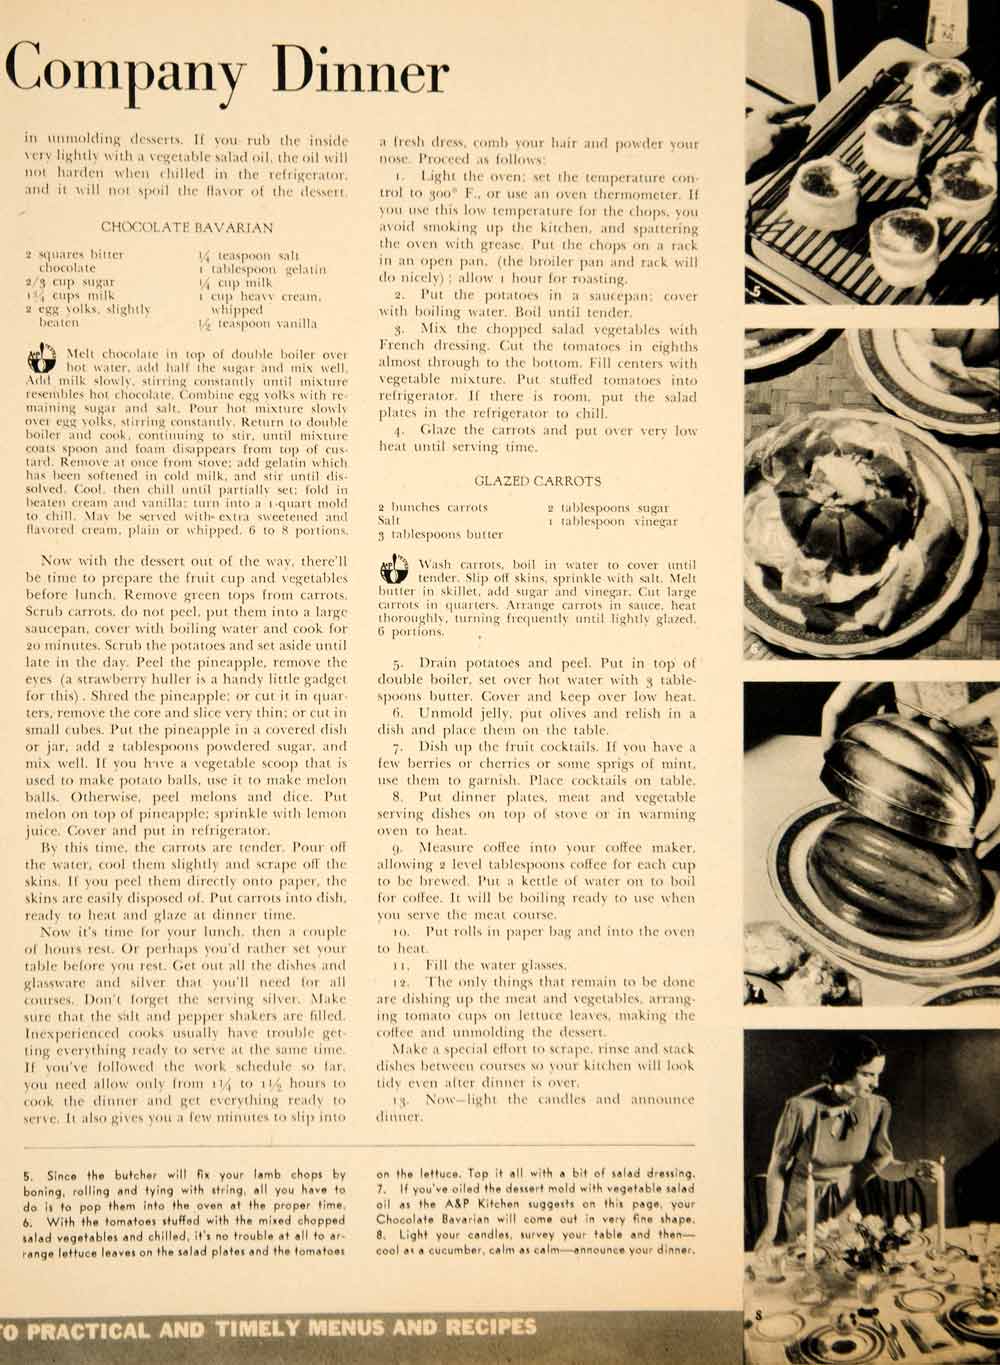 1938 Article Bride's First Dinner Menu Recipes Instructions Food Lamb Chops YWD3